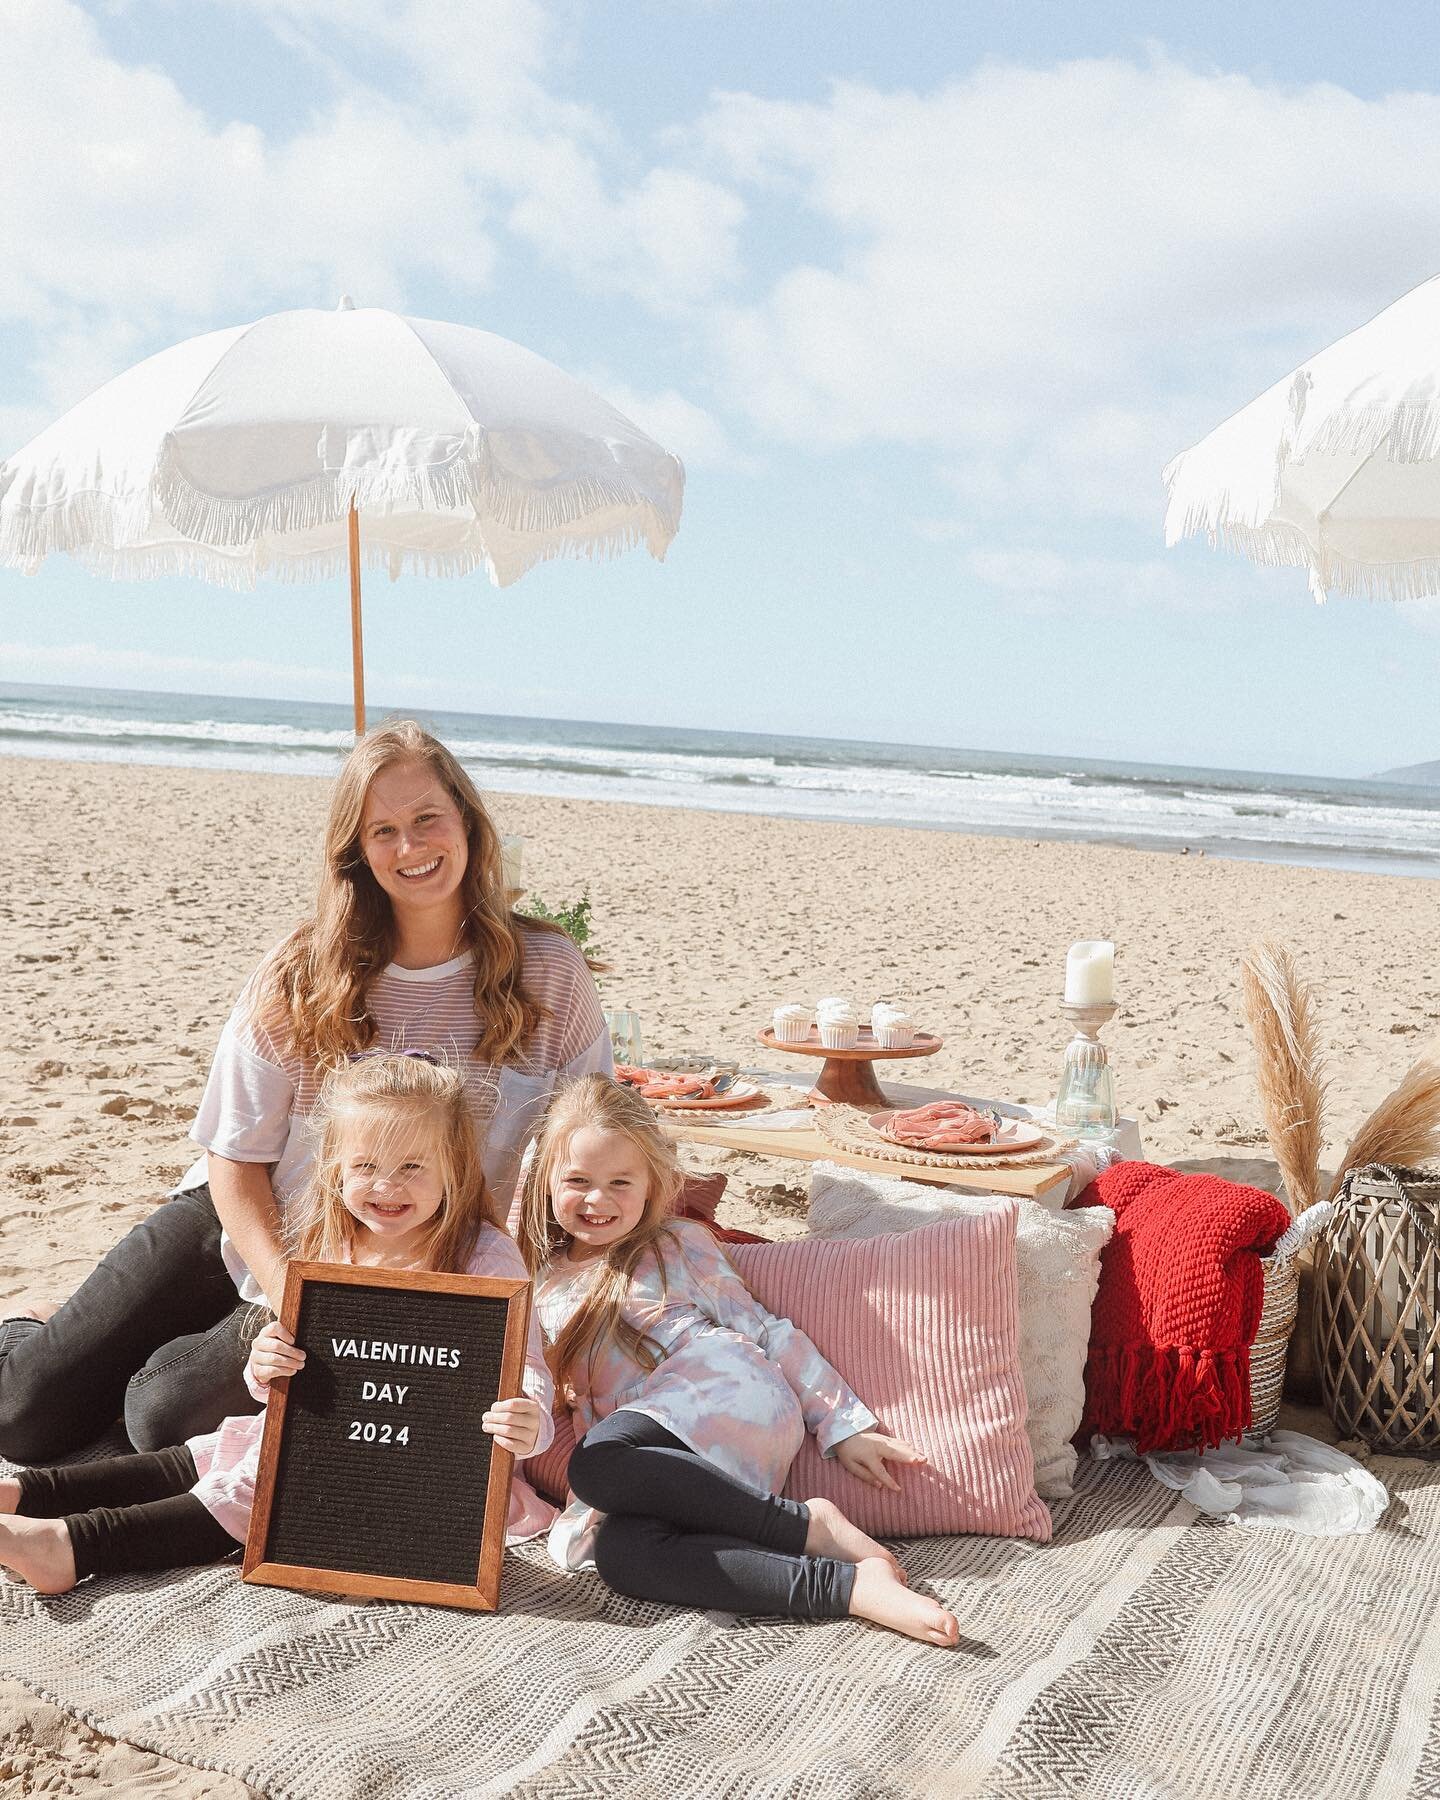 Hi👋🏼

I&rsquo;m Kelsey, the toddler mom behind Picnics by Kelsey. These are my wonderful daughters, Charlotte (4) &amp; Chloe (3). 

I&rsquo;ve finally decided to get out of my comfort zone and introduce myself. After having kids, I pretty much ref